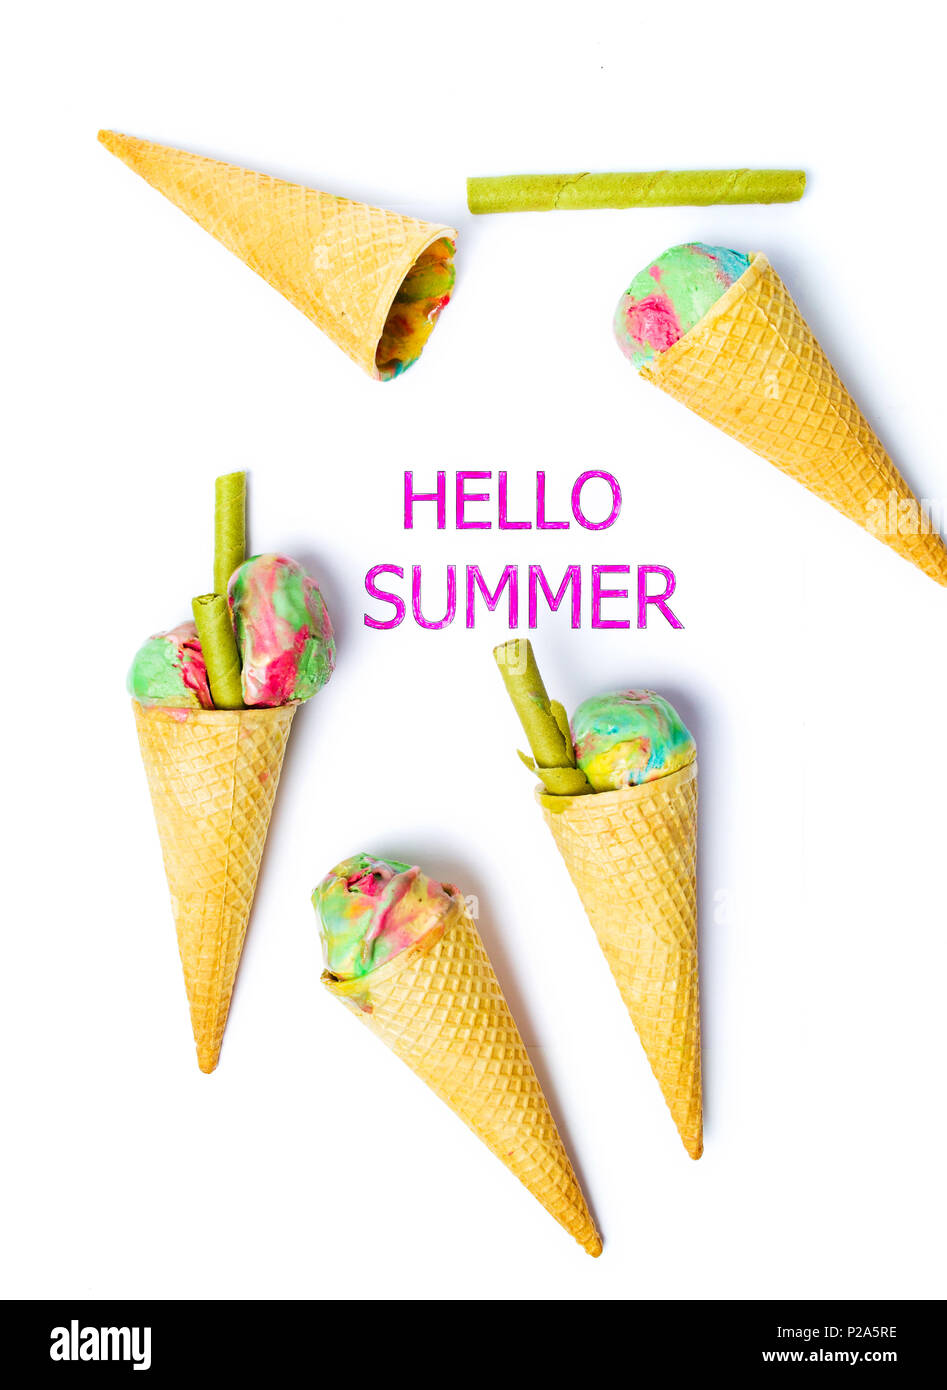 Hello summer background with ice cream cones on white Banque D'Images